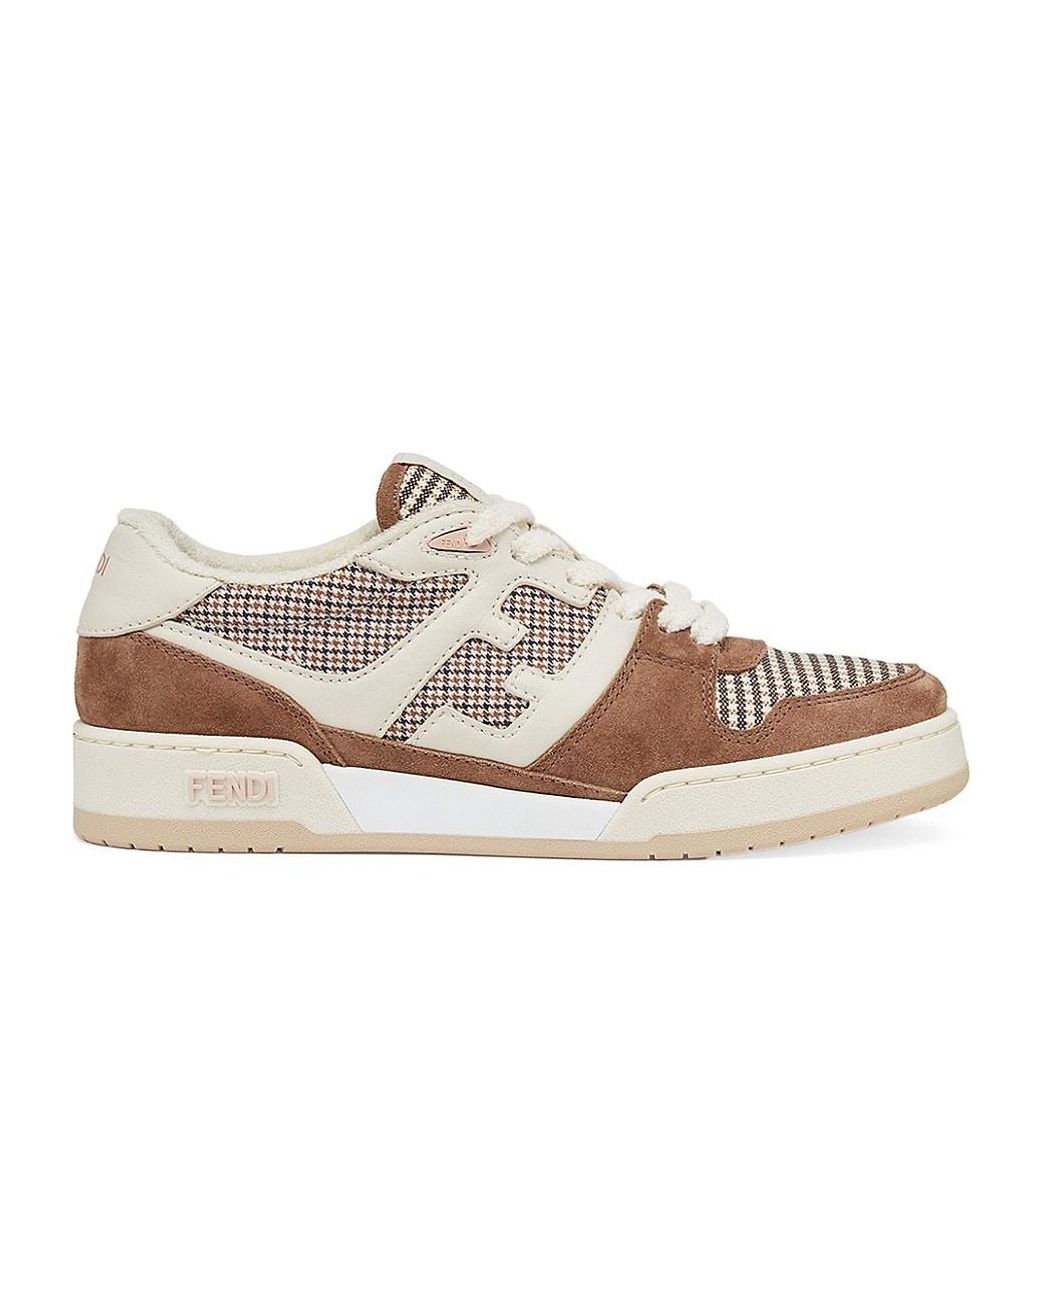 Fendi Match Houndstooth & Suede Low-top Sneakers in Brown | Lyst